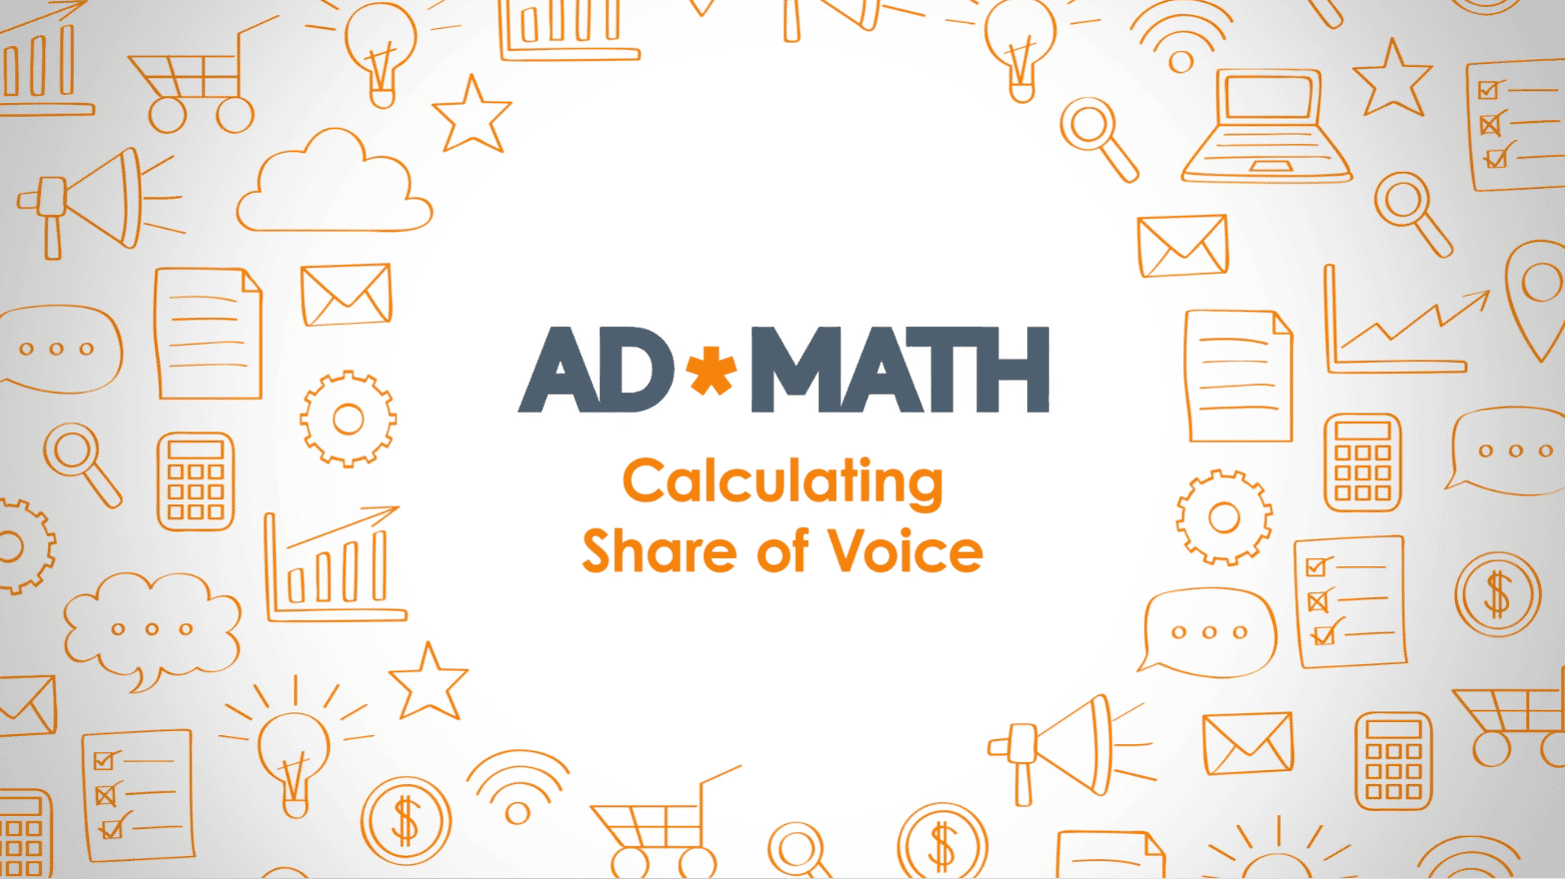 Share of Voice: How to Calculate It & Why It Matters